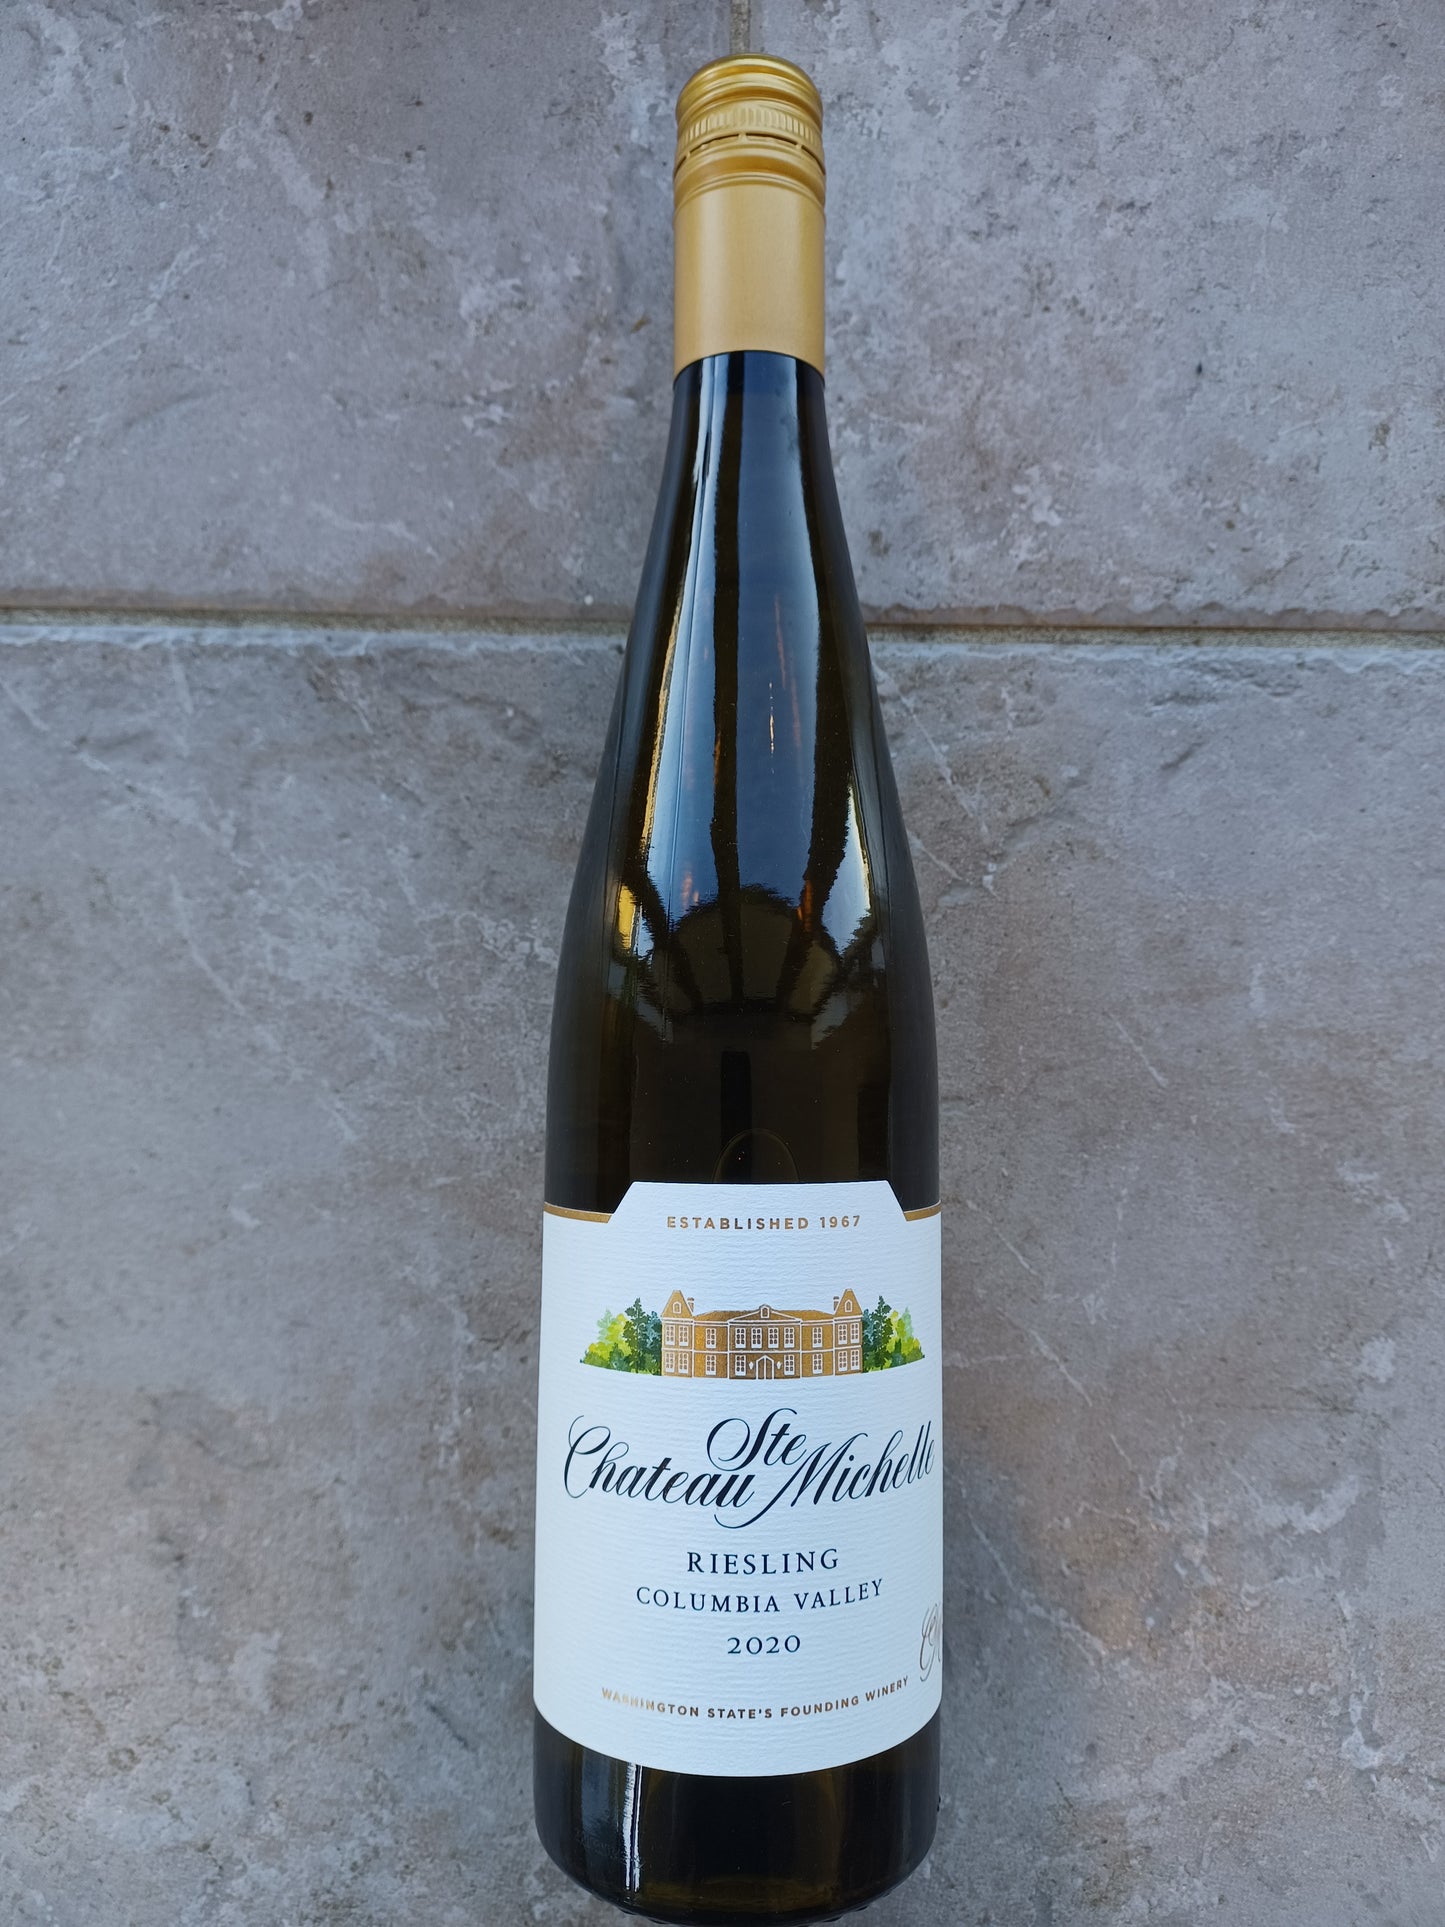 Chateau Ste Michelle Riesling 2021